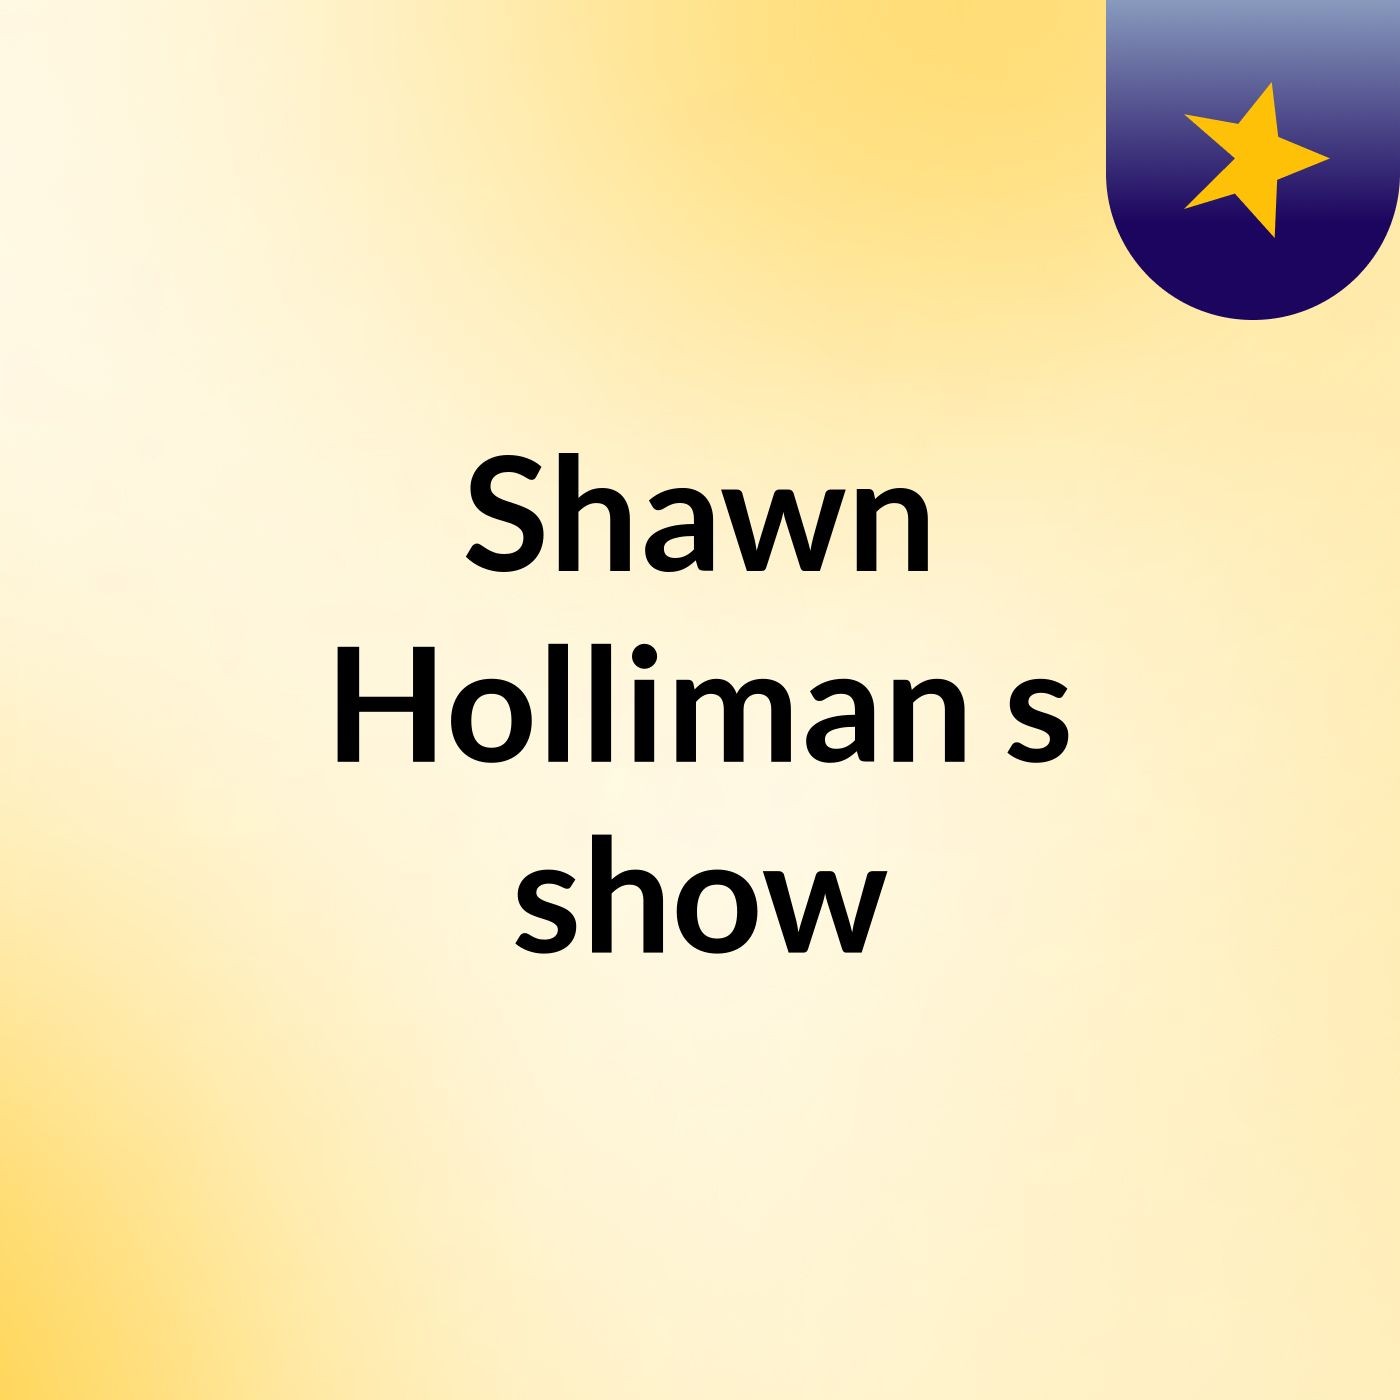 Shawn Holliman's show